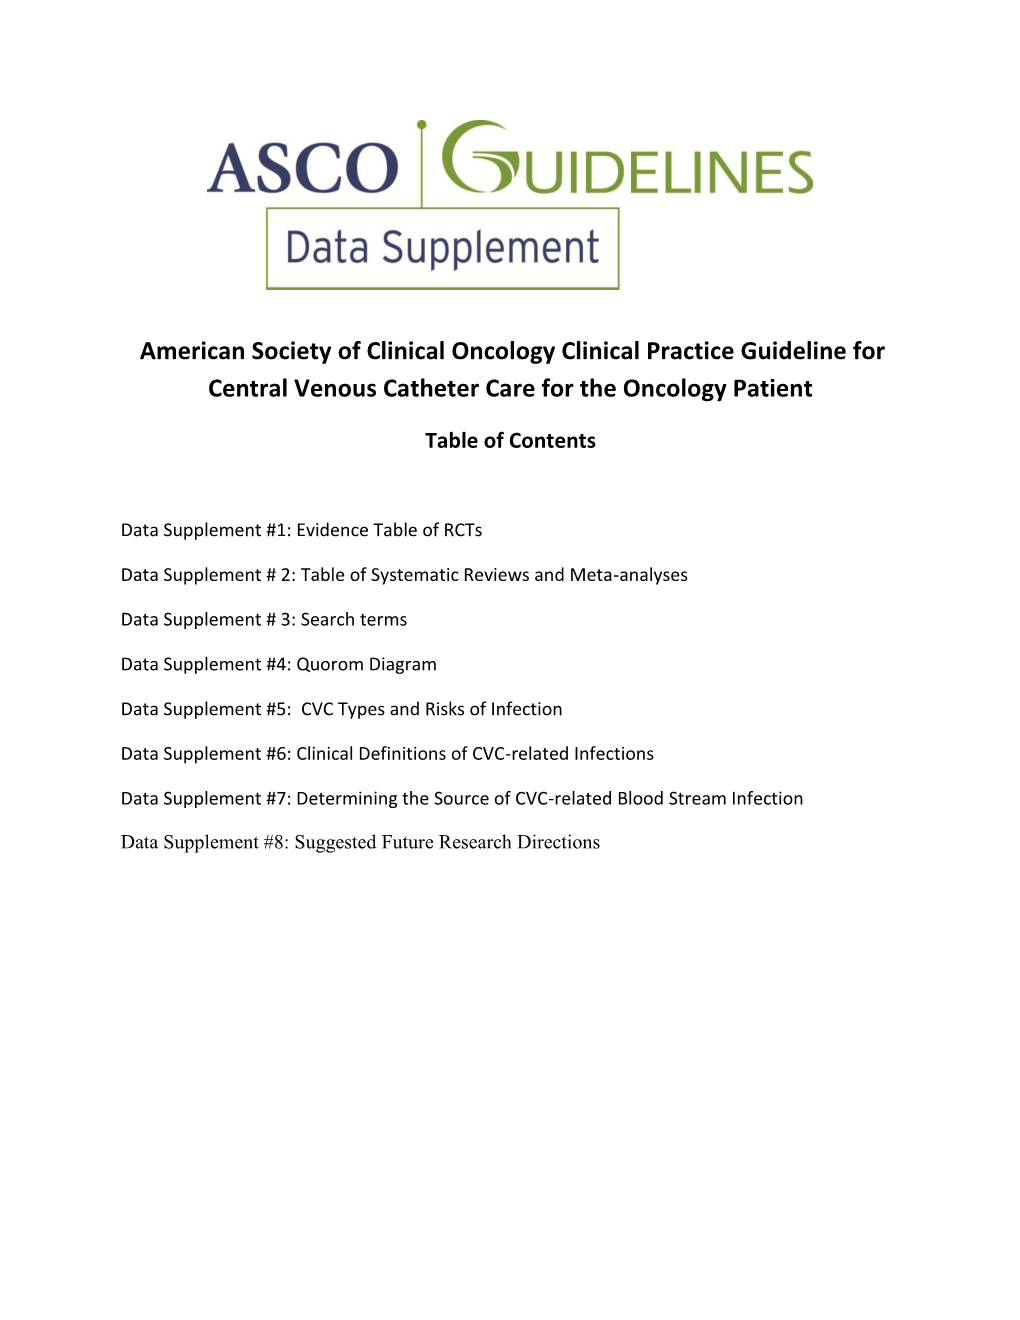 American Society of Clinical Oncology Clinical Practice Guideline for Central Venous Catheter Care for the Oncology Patient